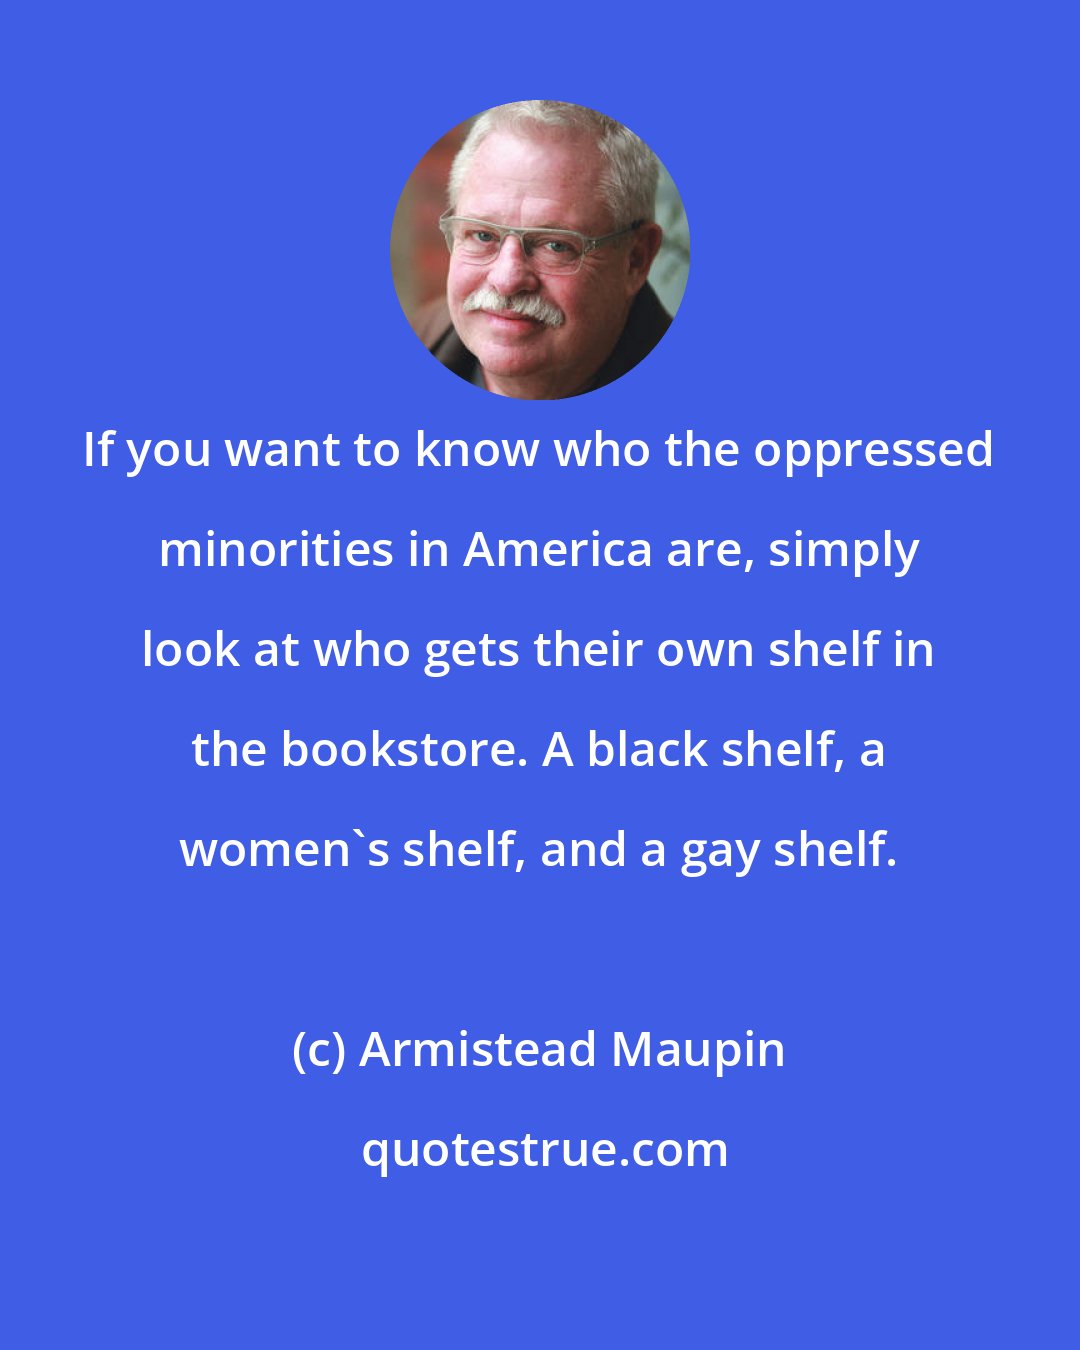 Armistead Maupin: If you want to know who the oppressed minorities in America are, simply look at who gets their own shelf in the bookstore. A black shelf, a women's shelf, and a gay shelf.